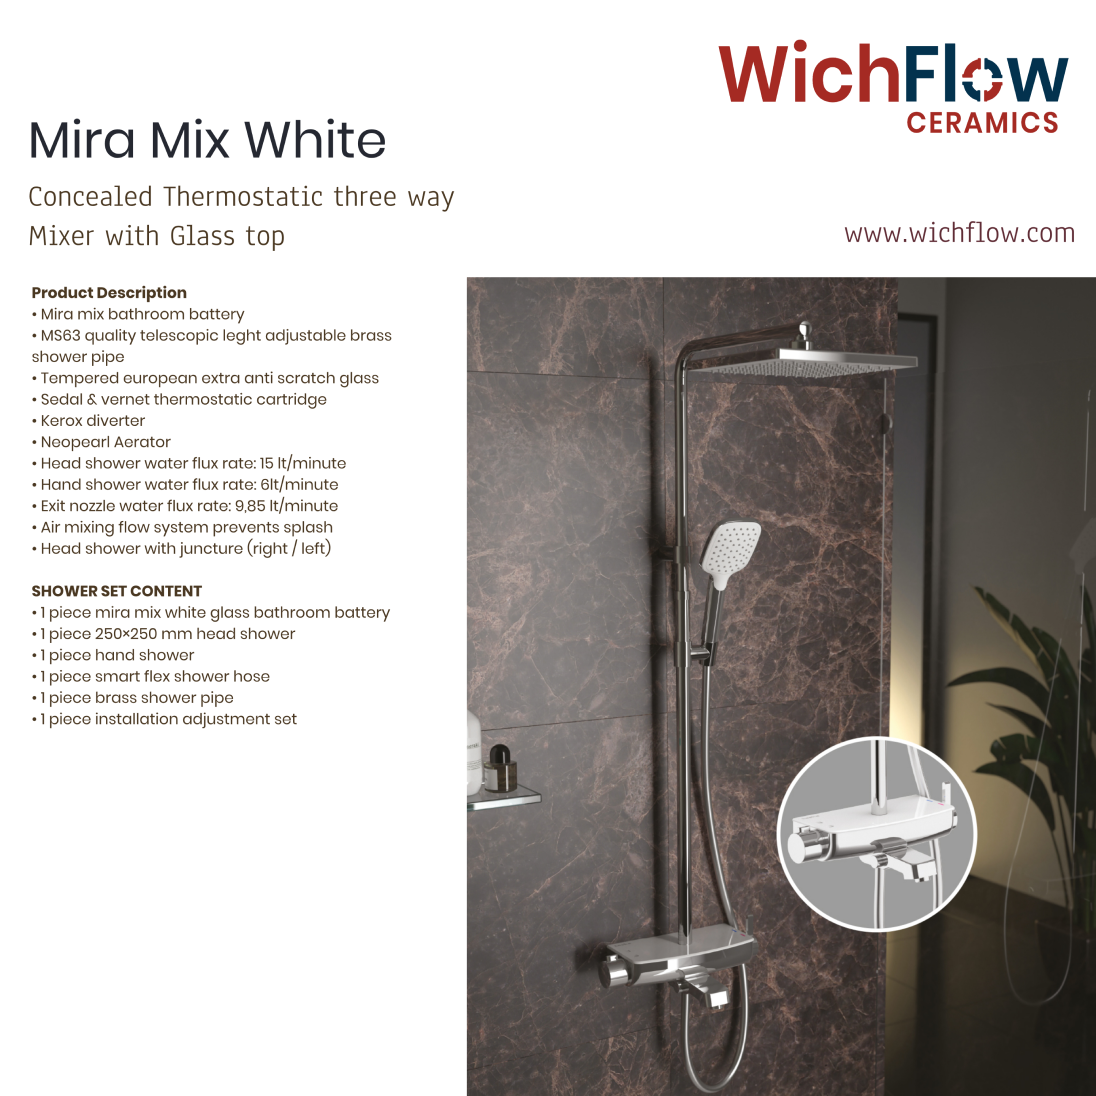 Mira Mix White Thermostatic three way Mixer with Glass top